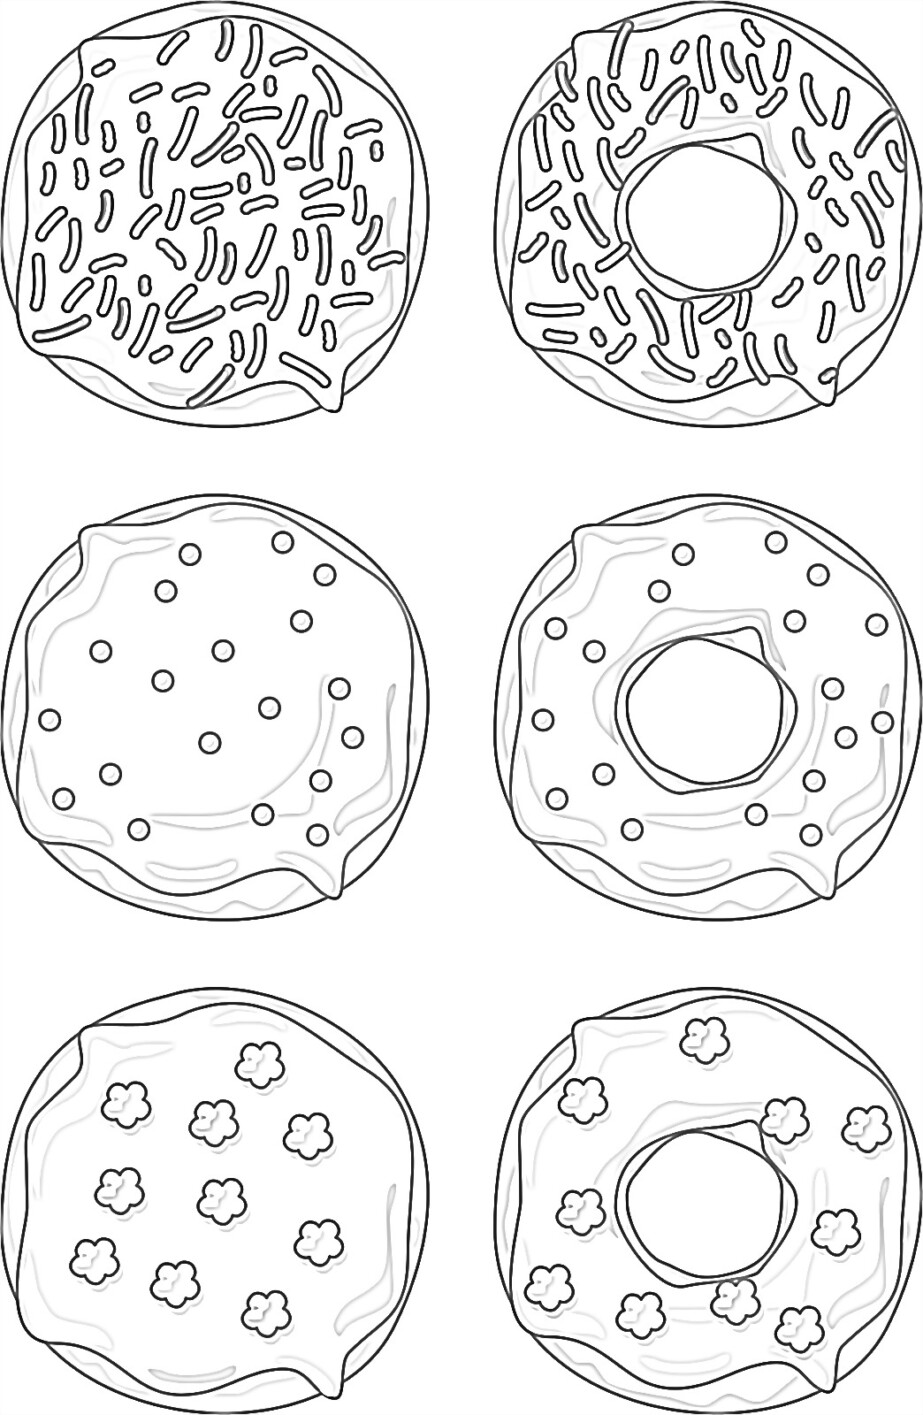 Delicious donuts coloring page